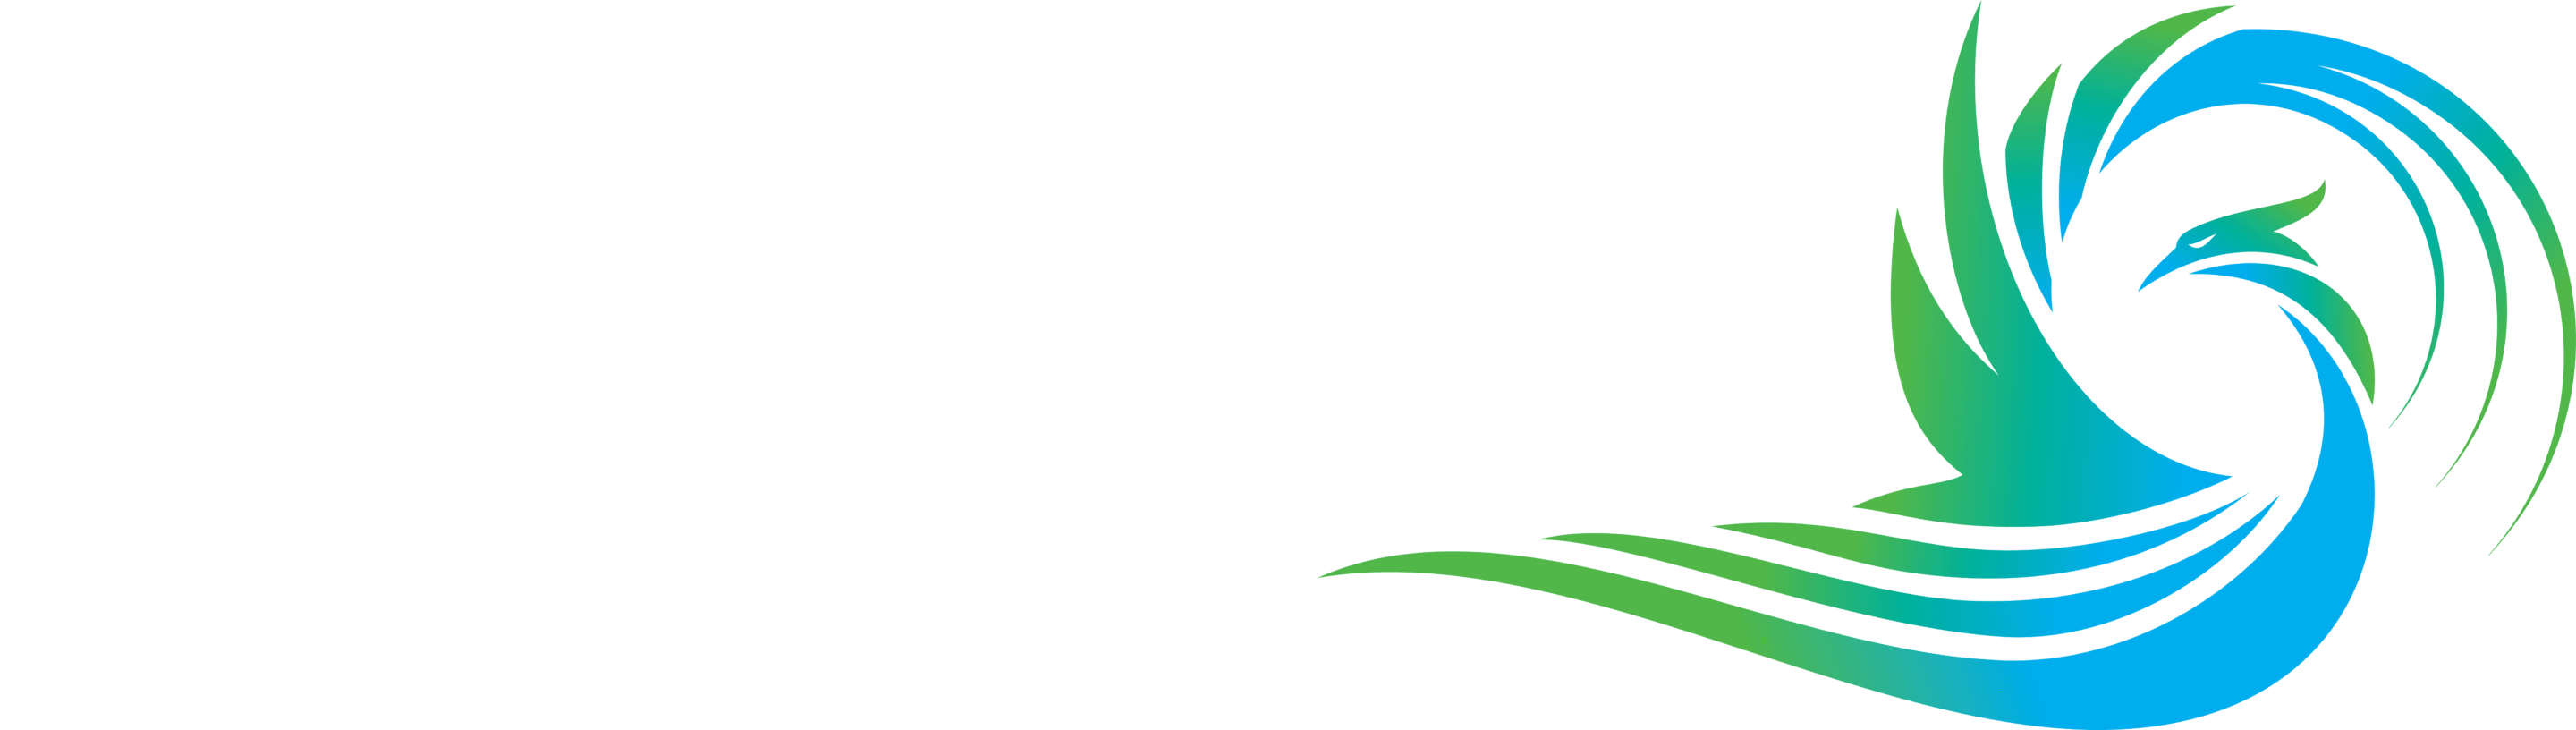 Cooney Engineered Solutions Home